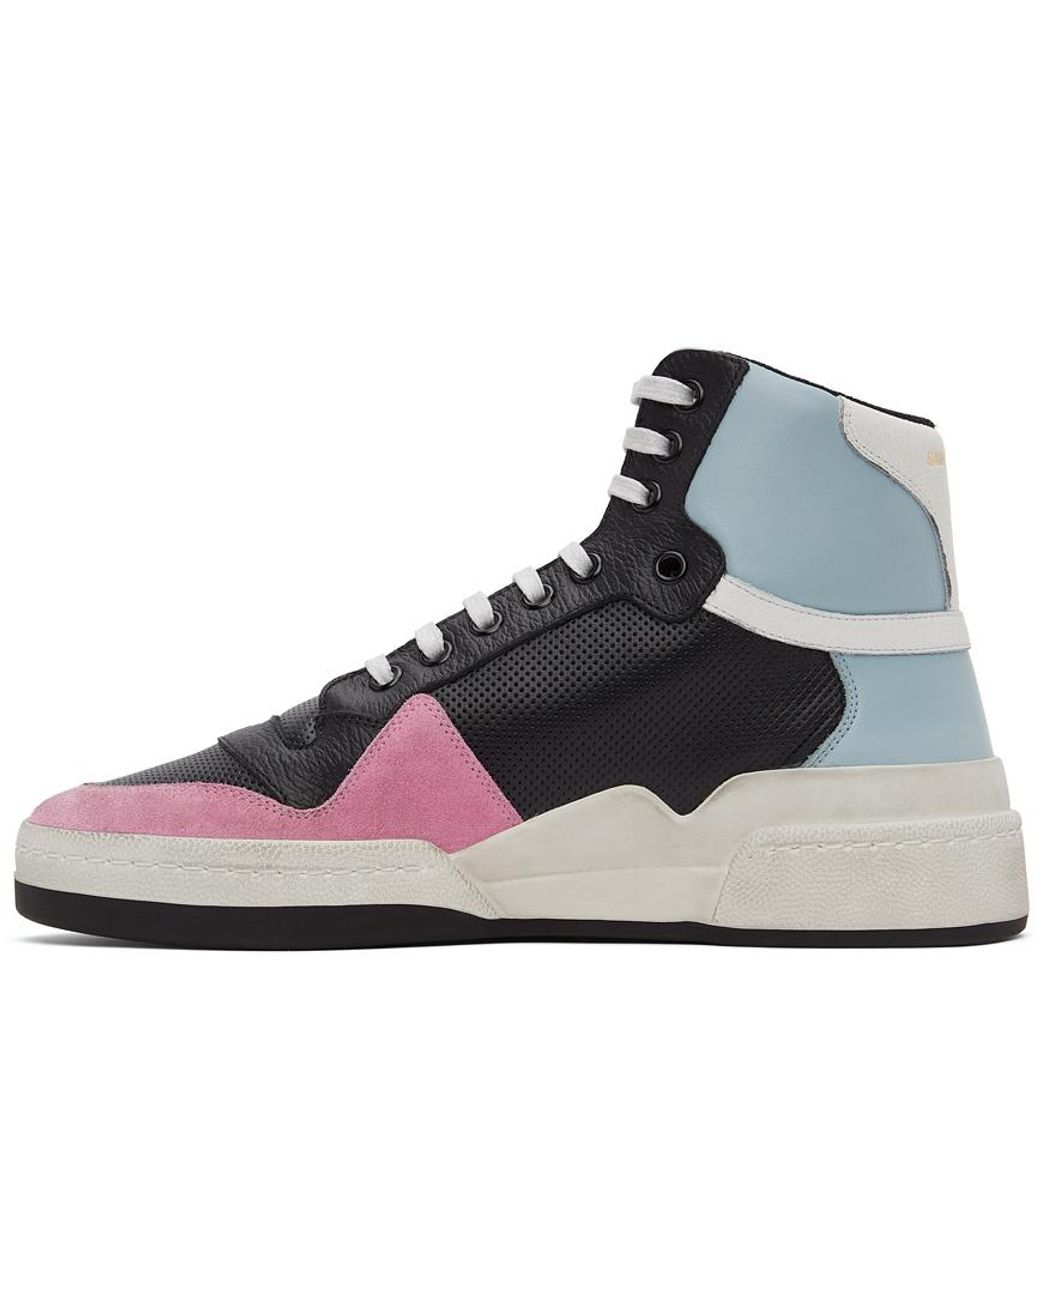 Saint Laurent Leather Sl24 High-top Sneakers in Blue for Men 